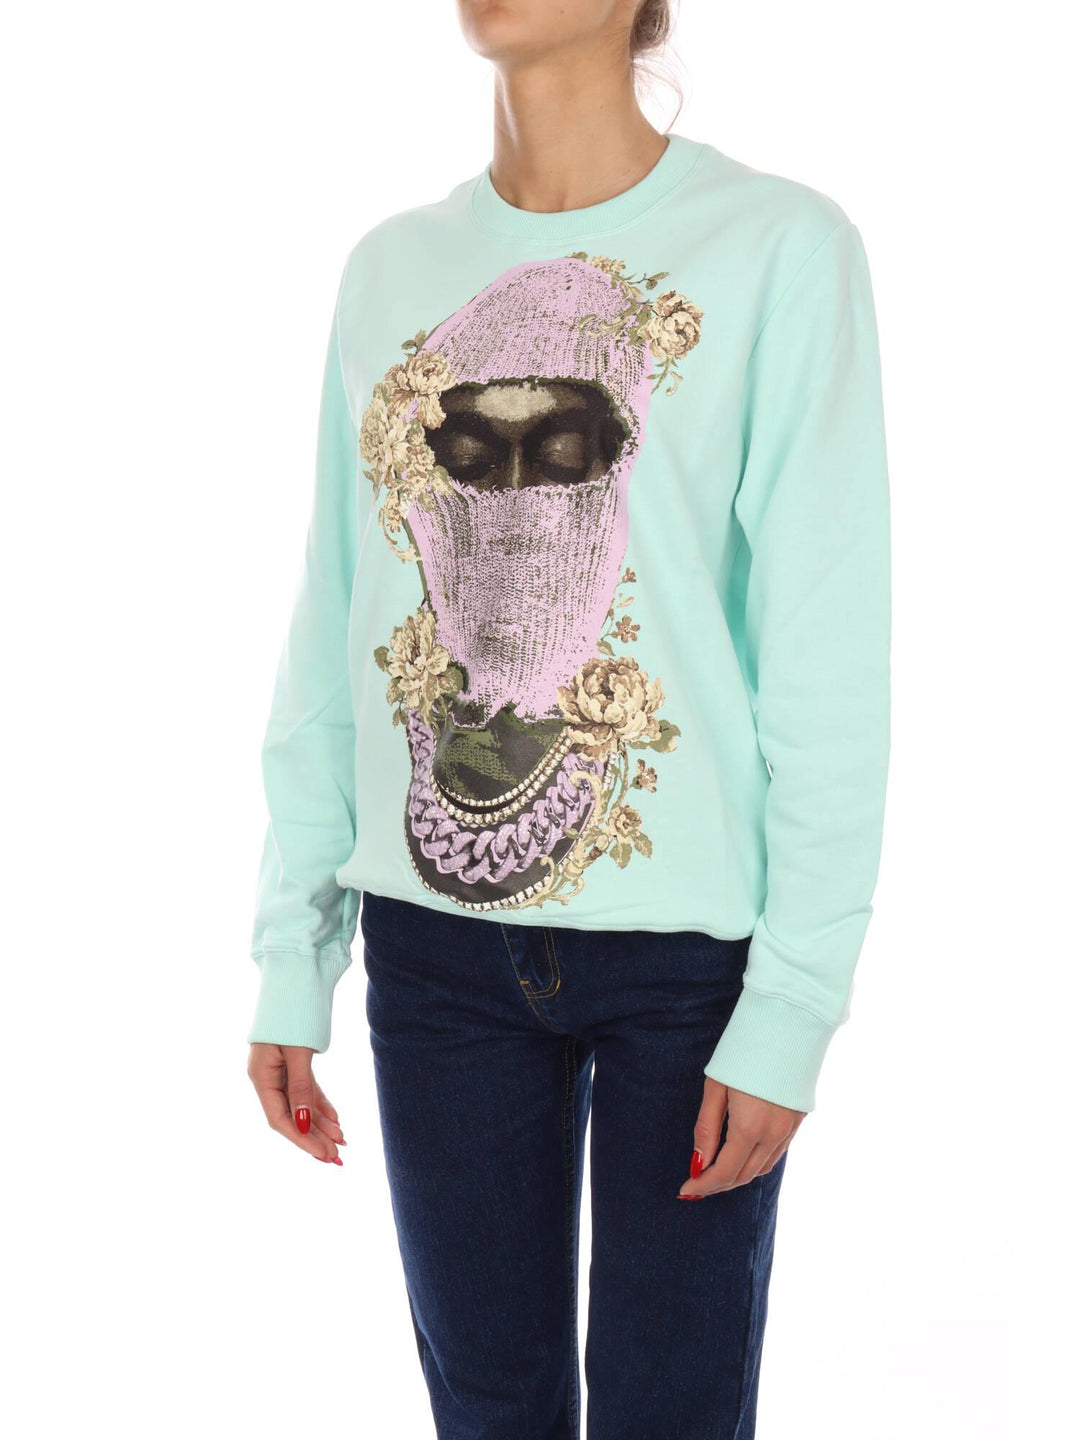 CREWNECK WITH MASK ROSES ON FRONT - LOGO PRINTED ON BACK